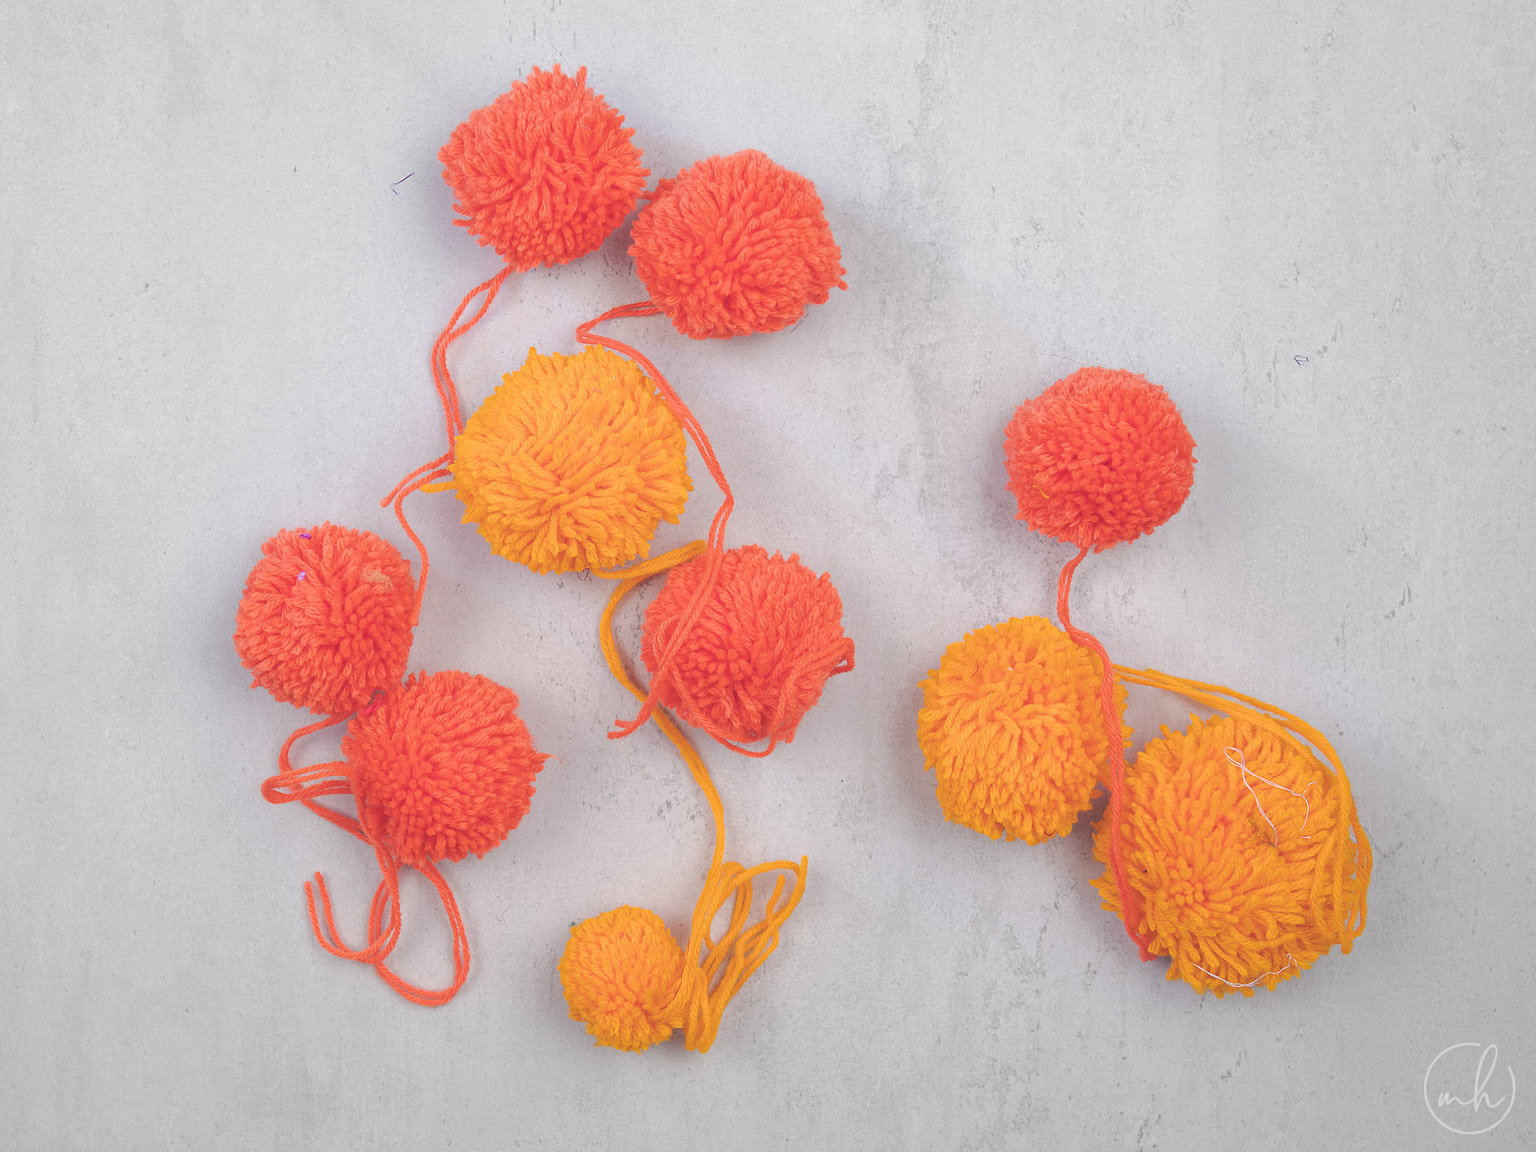 Red-yellow yarn pompoms with extra thread strewn around